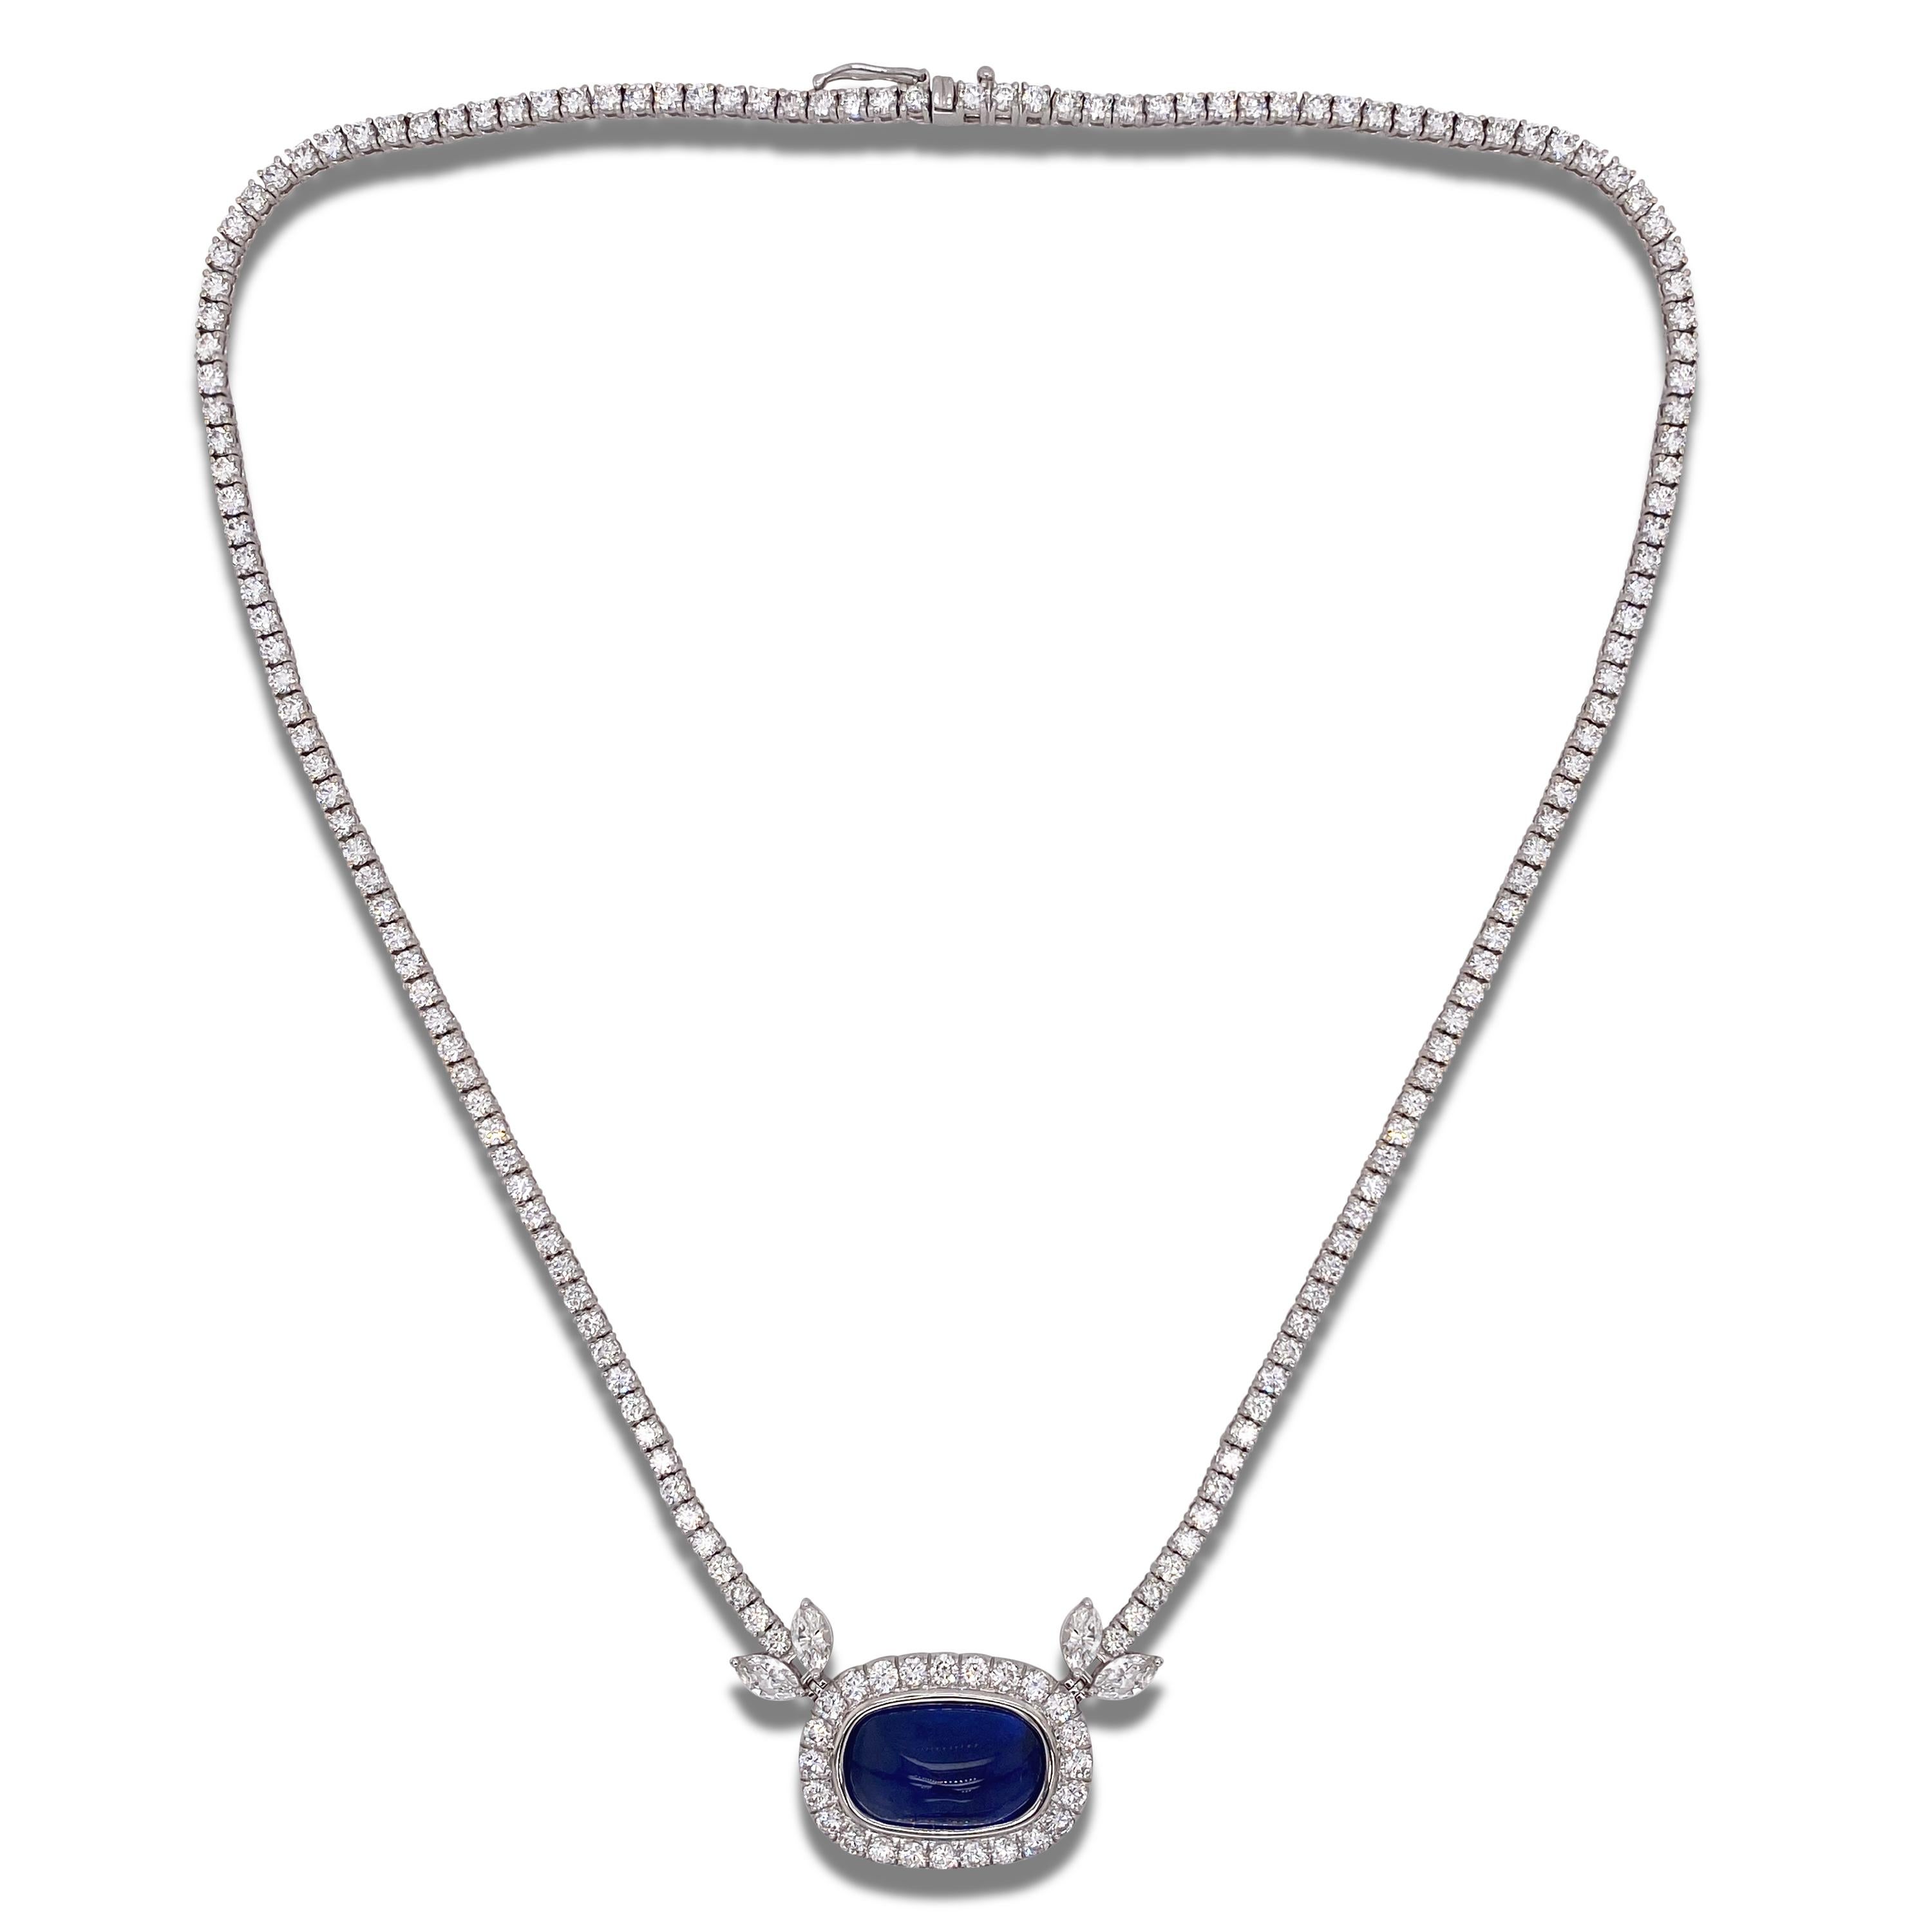 18.72 Carat Burma No Heat Cabochon Blue Sapphire 18K White Gold Diamond Necklace

This necklace is certified by Gubelin and features a round and marquise, brilliant cut diamond pendant necklace with a cabochon, burma, no heat blue sapphire